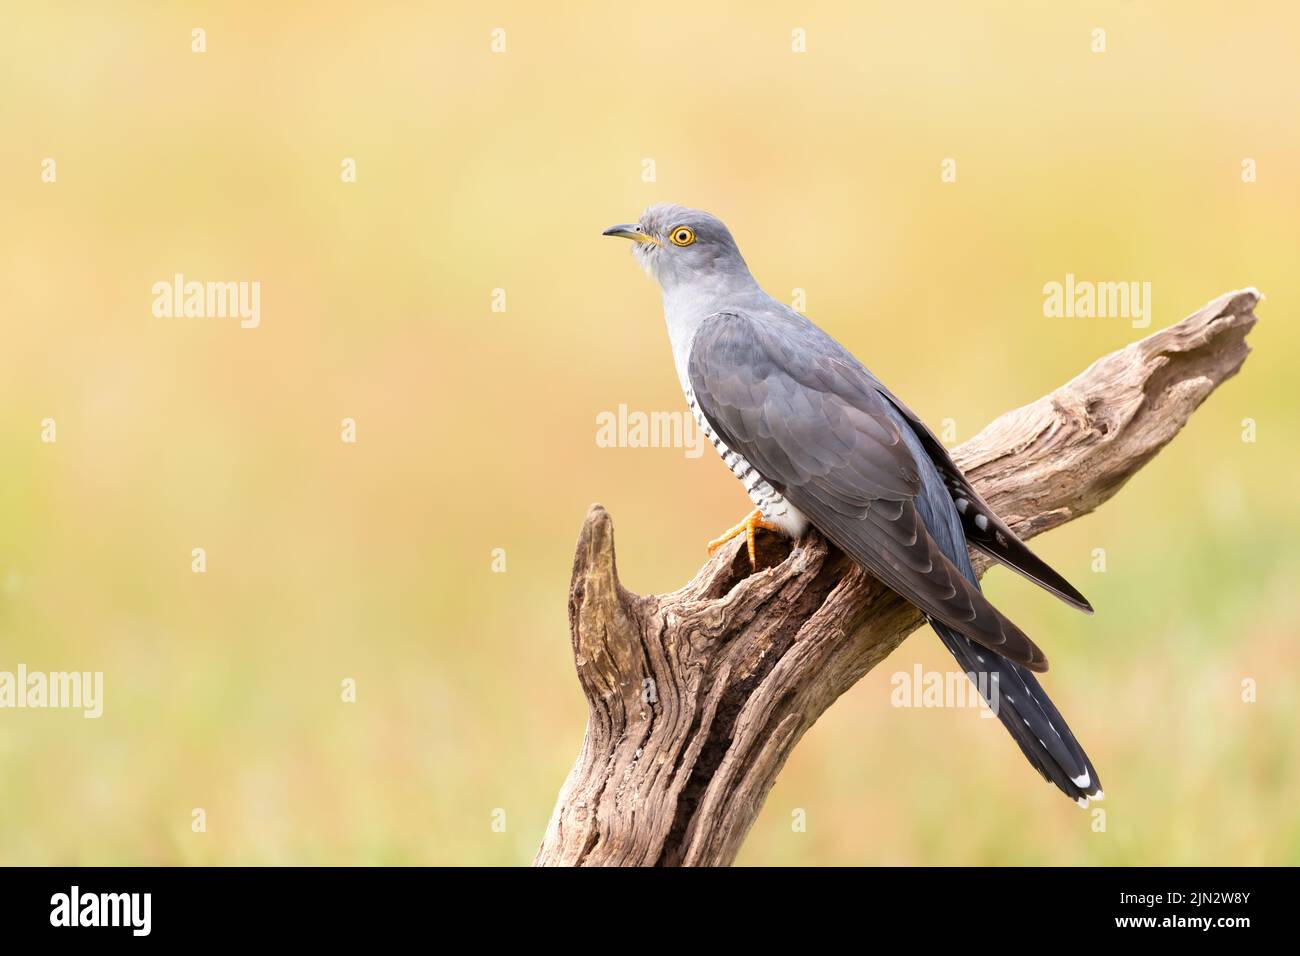 Close up of a Common Cuckoo perched on a tree branch, UK. Stock Photo